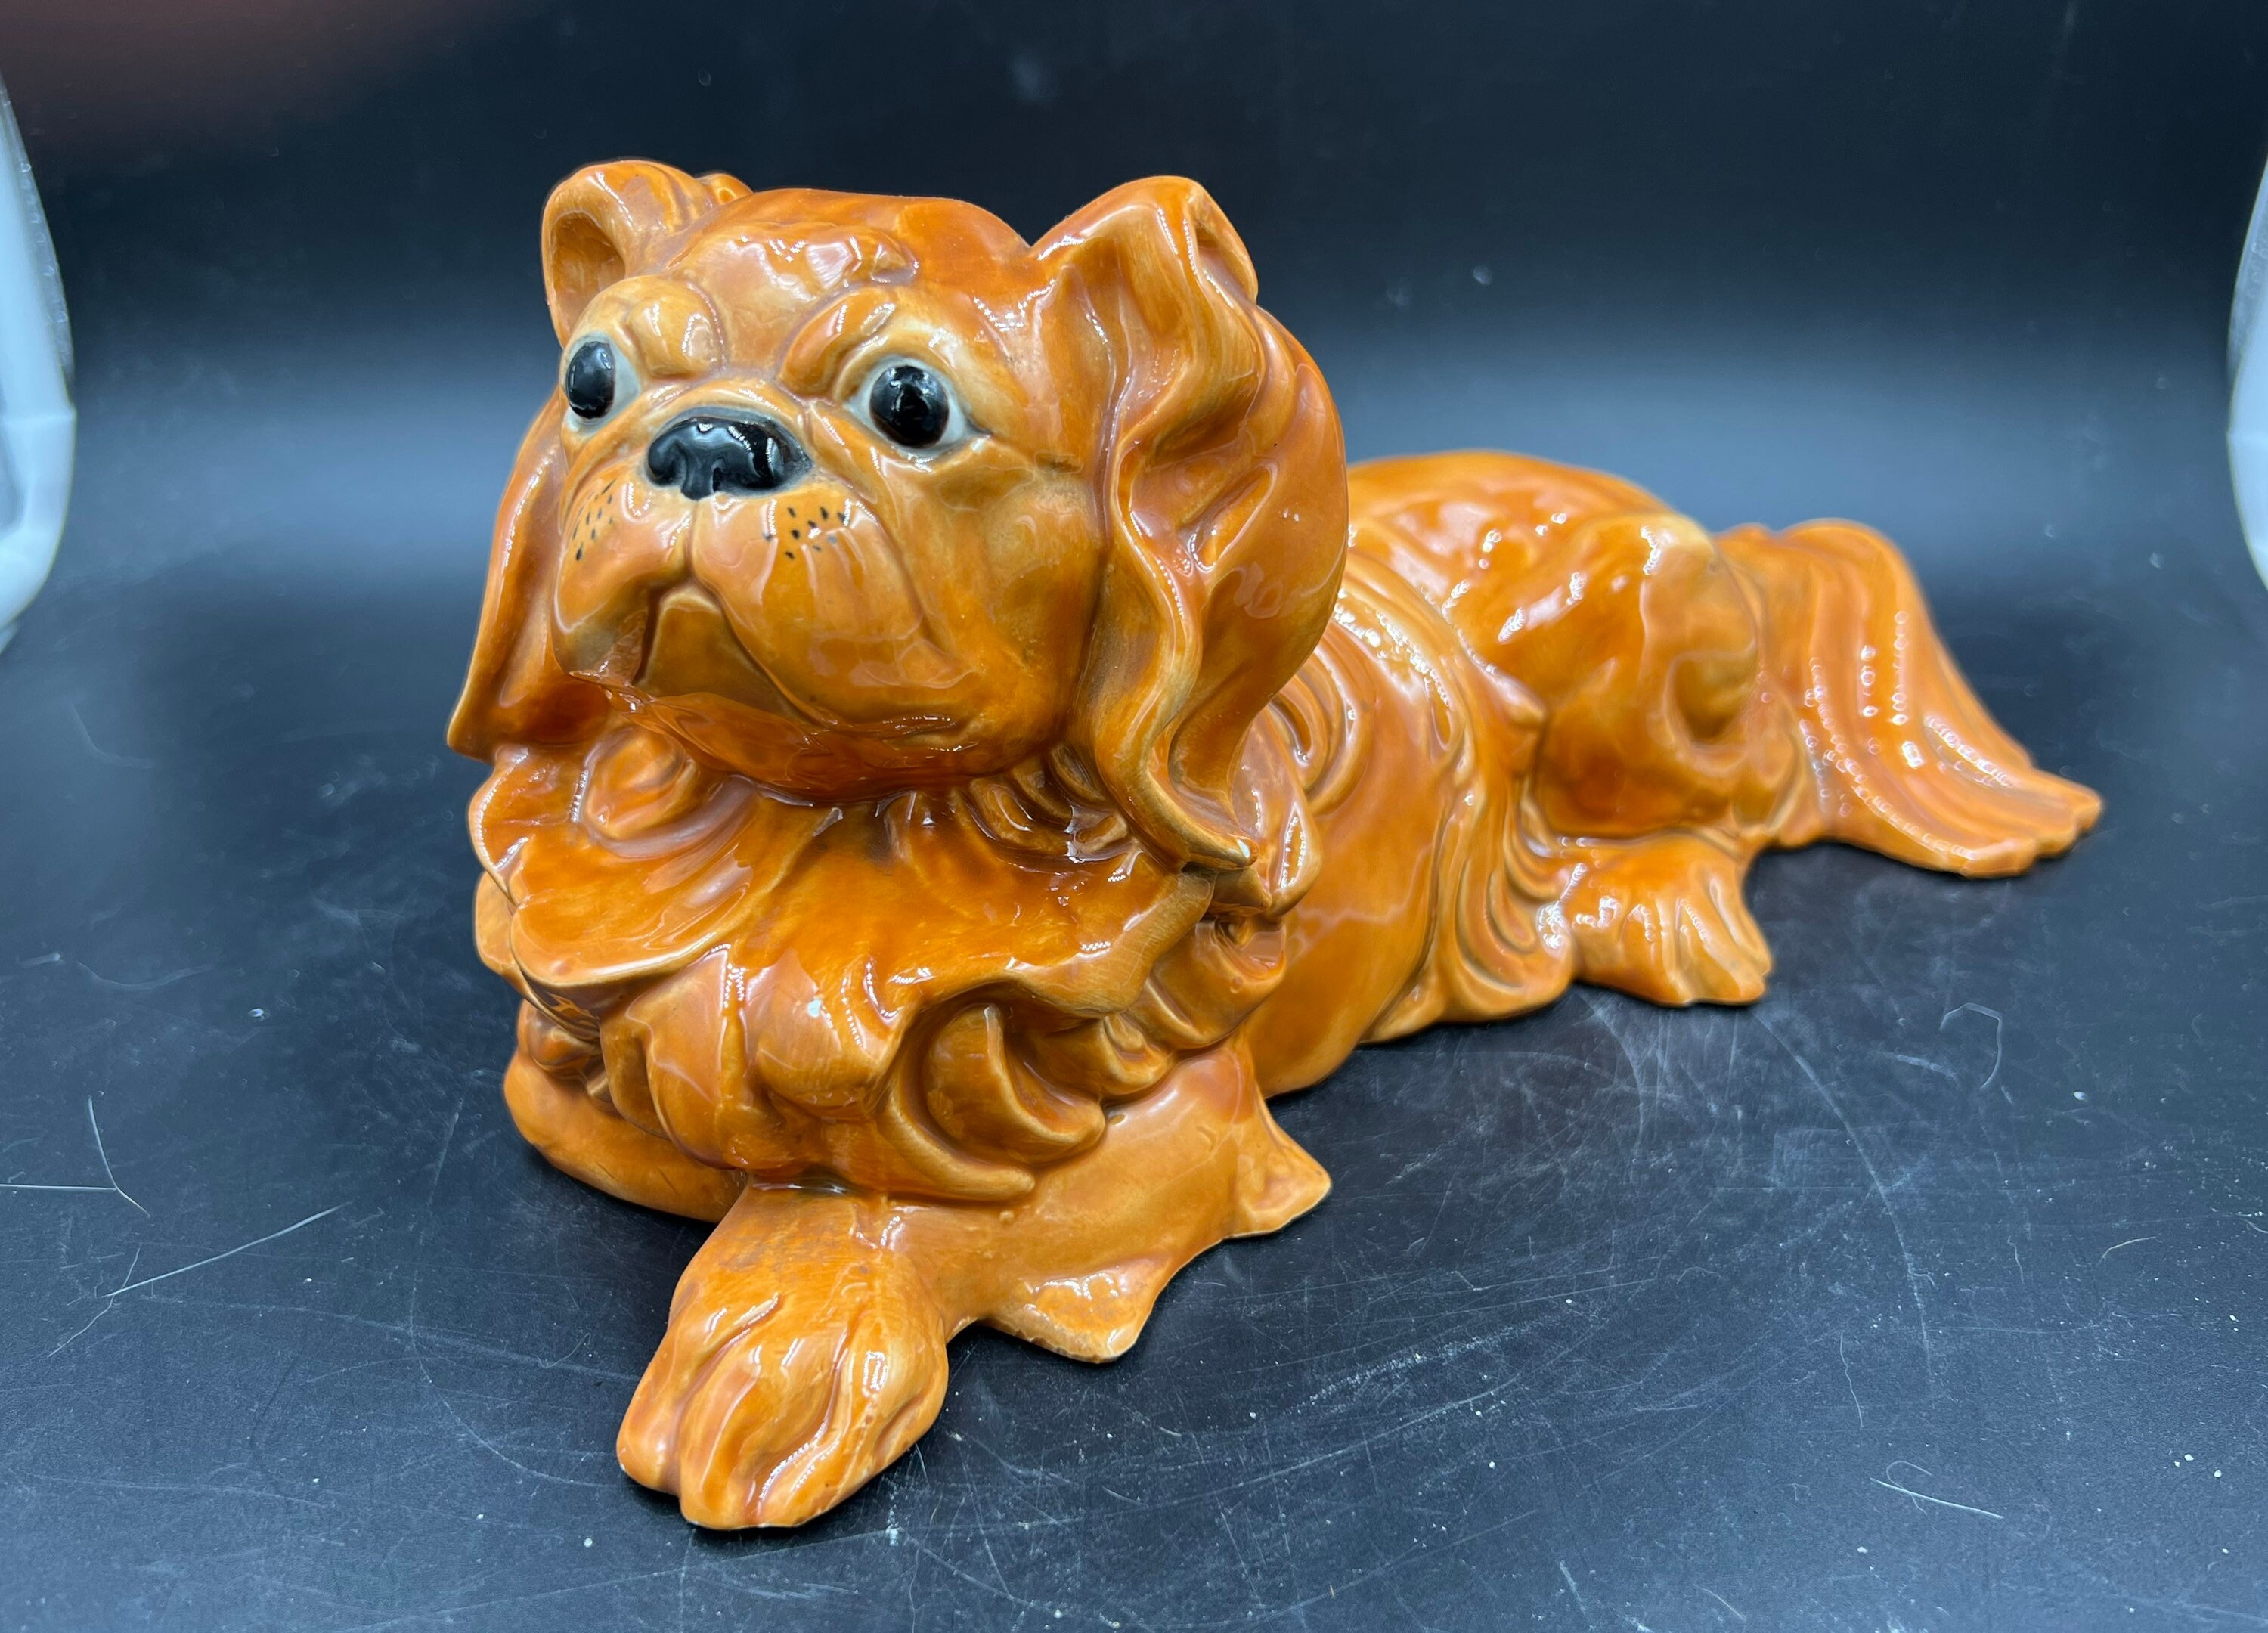 3d Puppy Mold 3d Lying Puppy Mold Maltese Doggie Mold Silicone Mold Maltese  Dog 3d Dog Soap or Candle Mold Pet Candle Mold Animal 